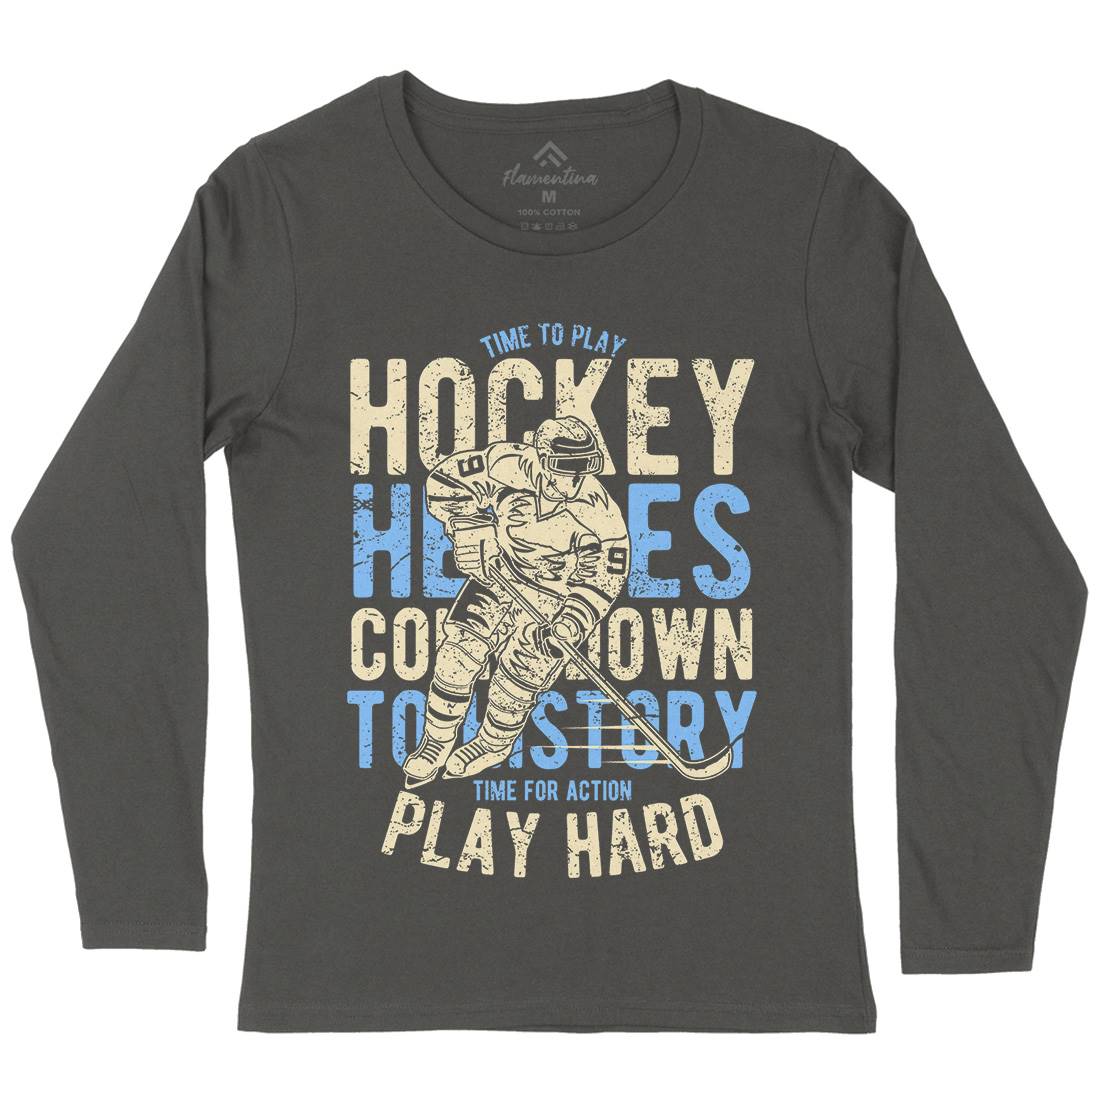 Time To Play Hockey Womens Long Sleeve T-Shirt Sport A179